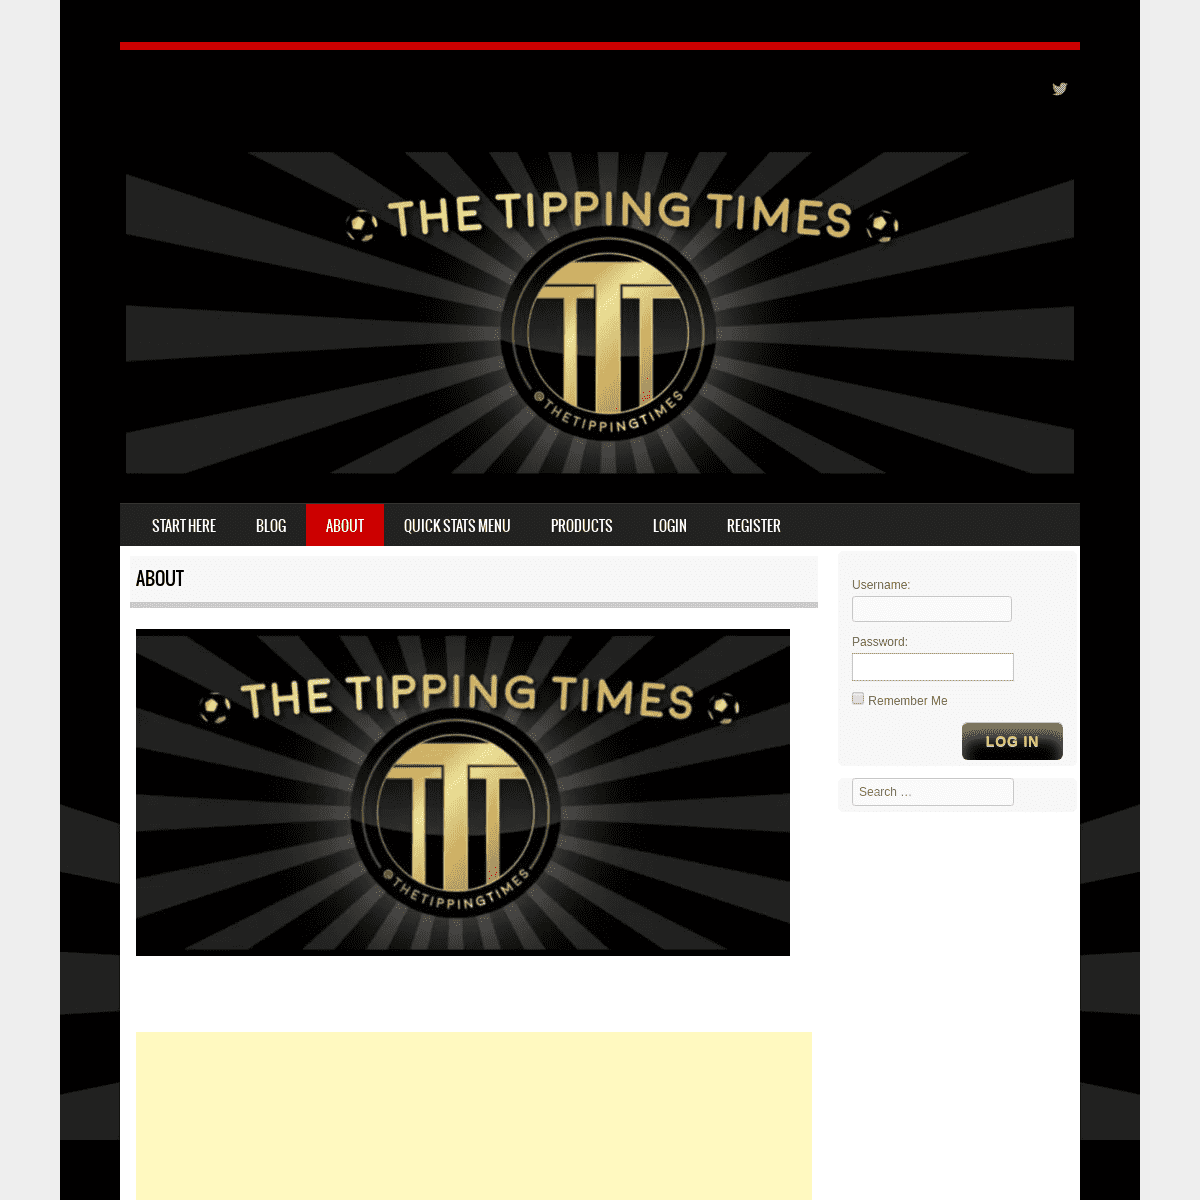 A complete backup of thetippingtimes.com